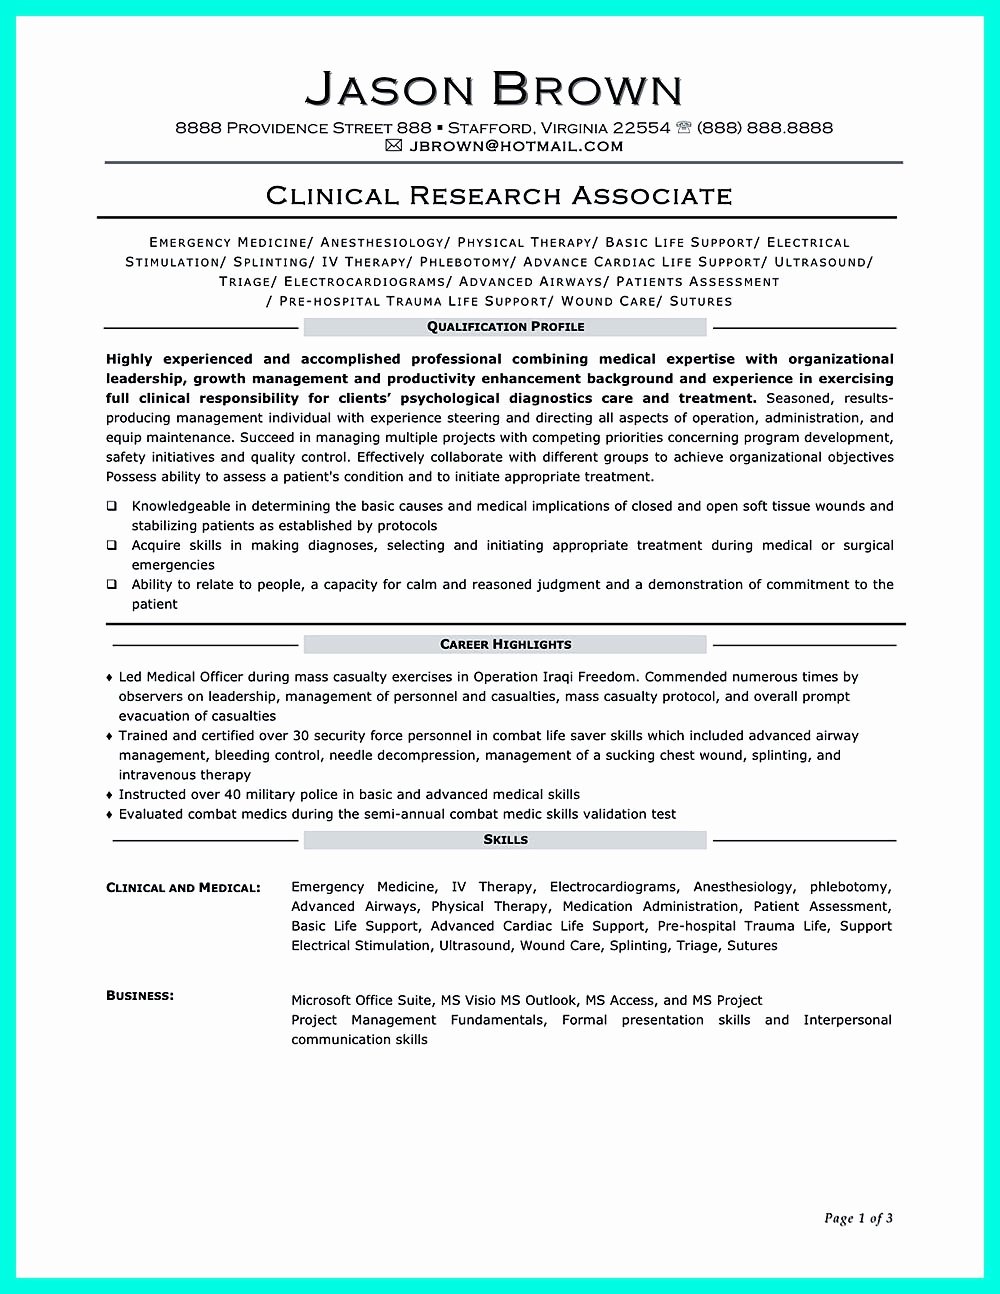 Clinical Research associate Resume Objectives are Needed